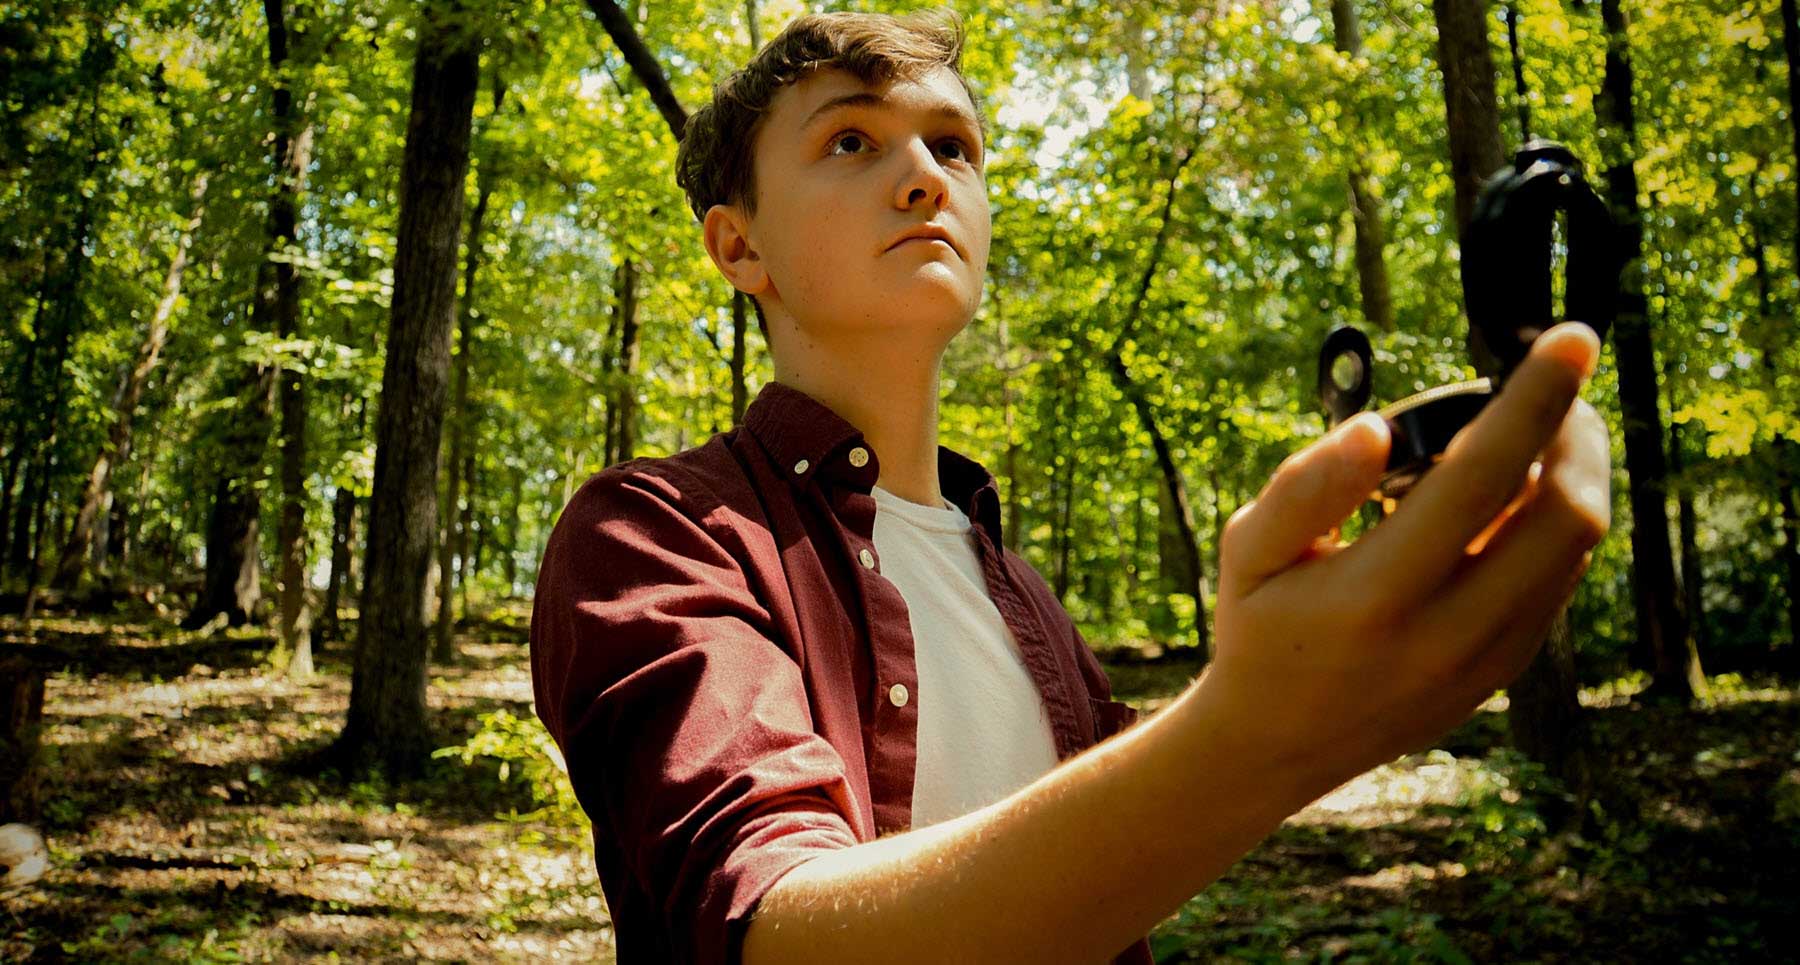 guy-standing-in-the-woods-with-a-compass-wanting-to-make-better-choices-in-life